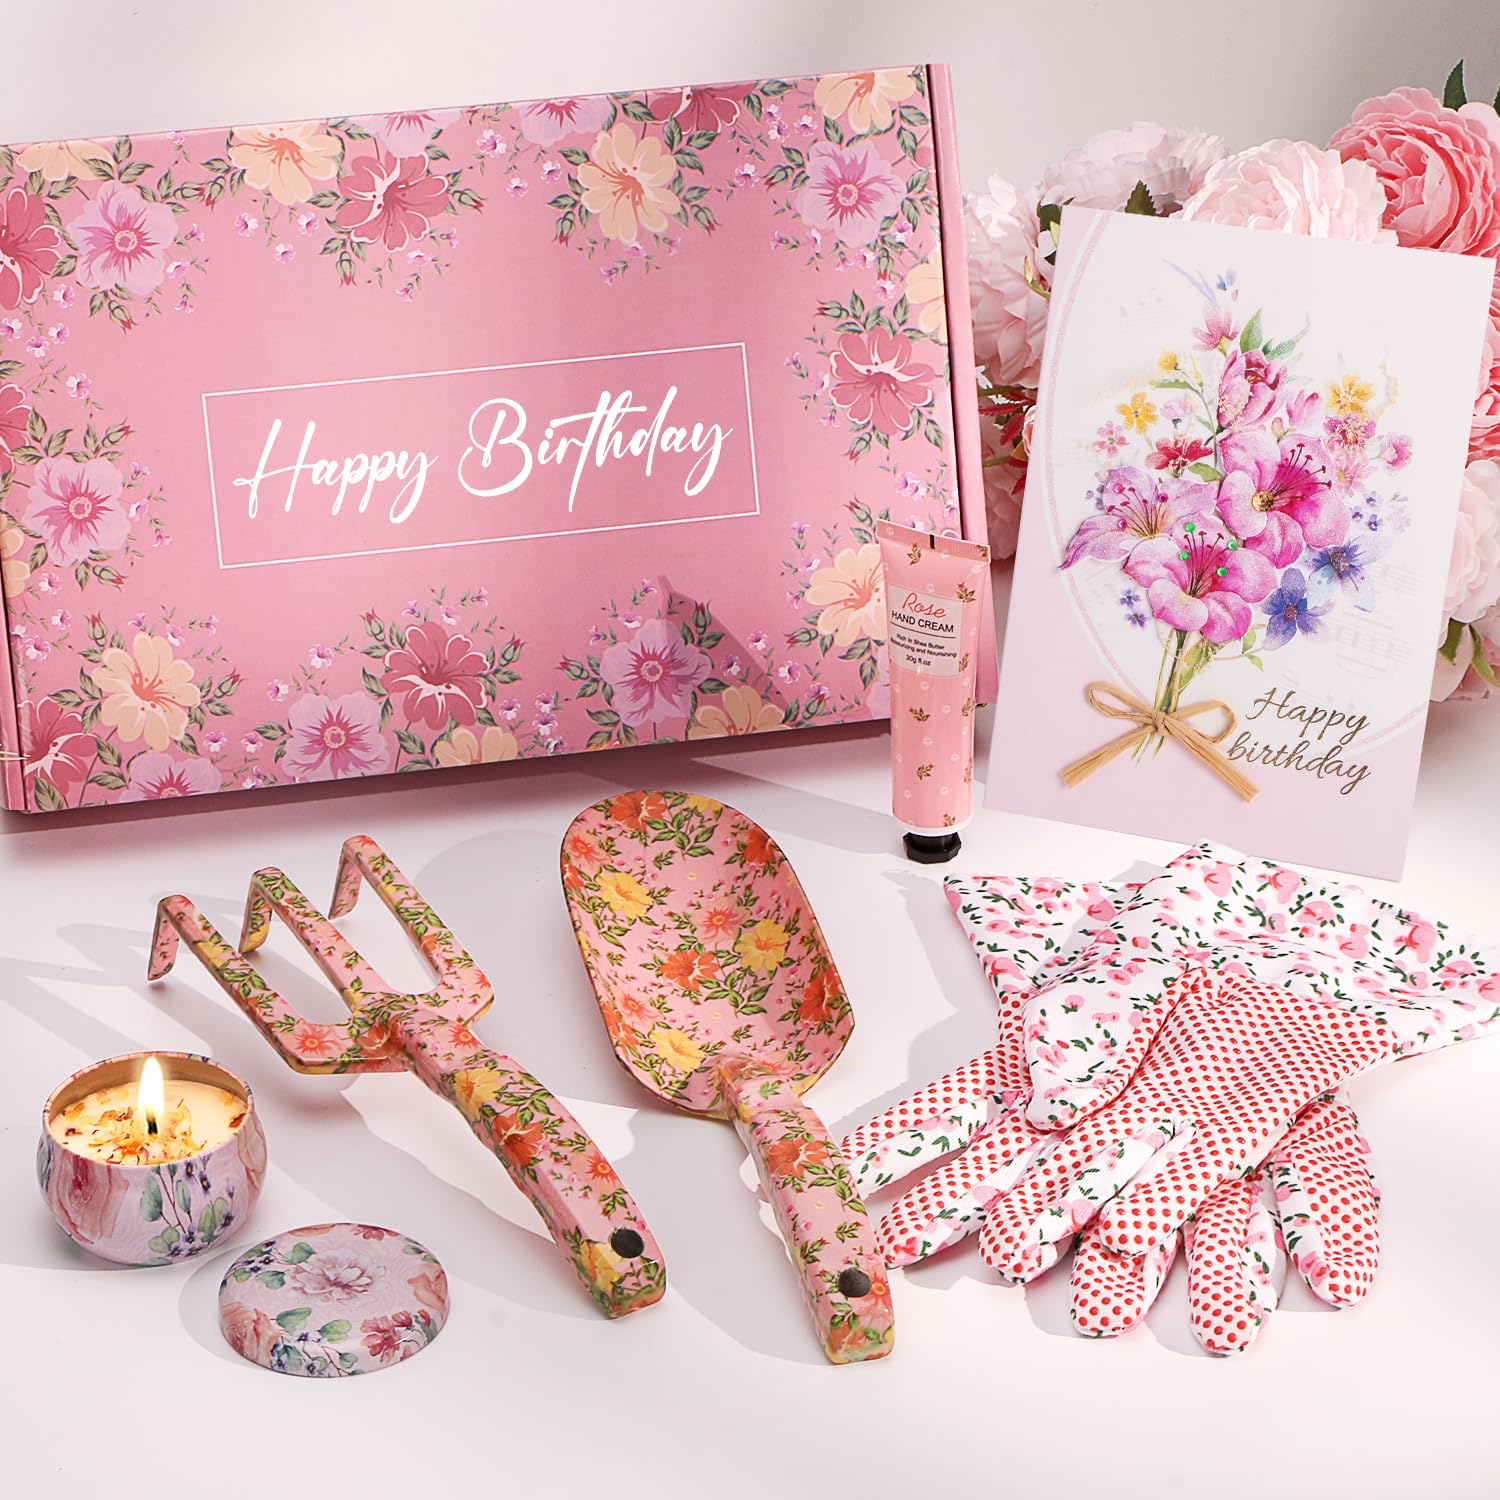 Birthday Gifts for Women Mum, Presents for Her: Mum Grandma Friends, Gardening Gifts for Women, Ladies Hamper Mummy Garden Gift, Gifts for 50Th 60Th 70Th Birthday, Retirement, Christmas, Mothers Day